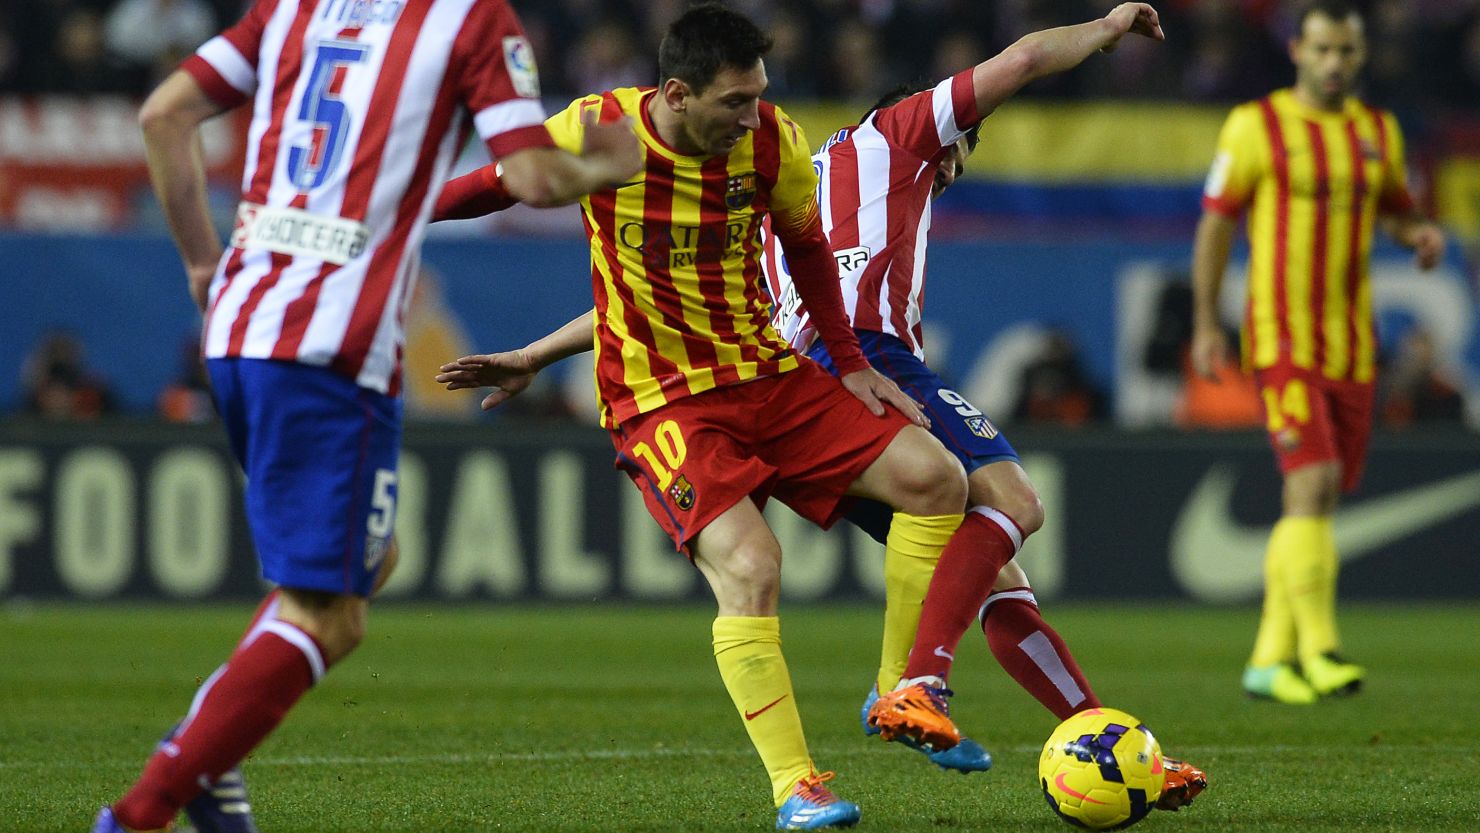 Lionel Messi tangles with former teammate David Villa during the 0-0 draw at the Vicente Calderon Stadium on Saturday.